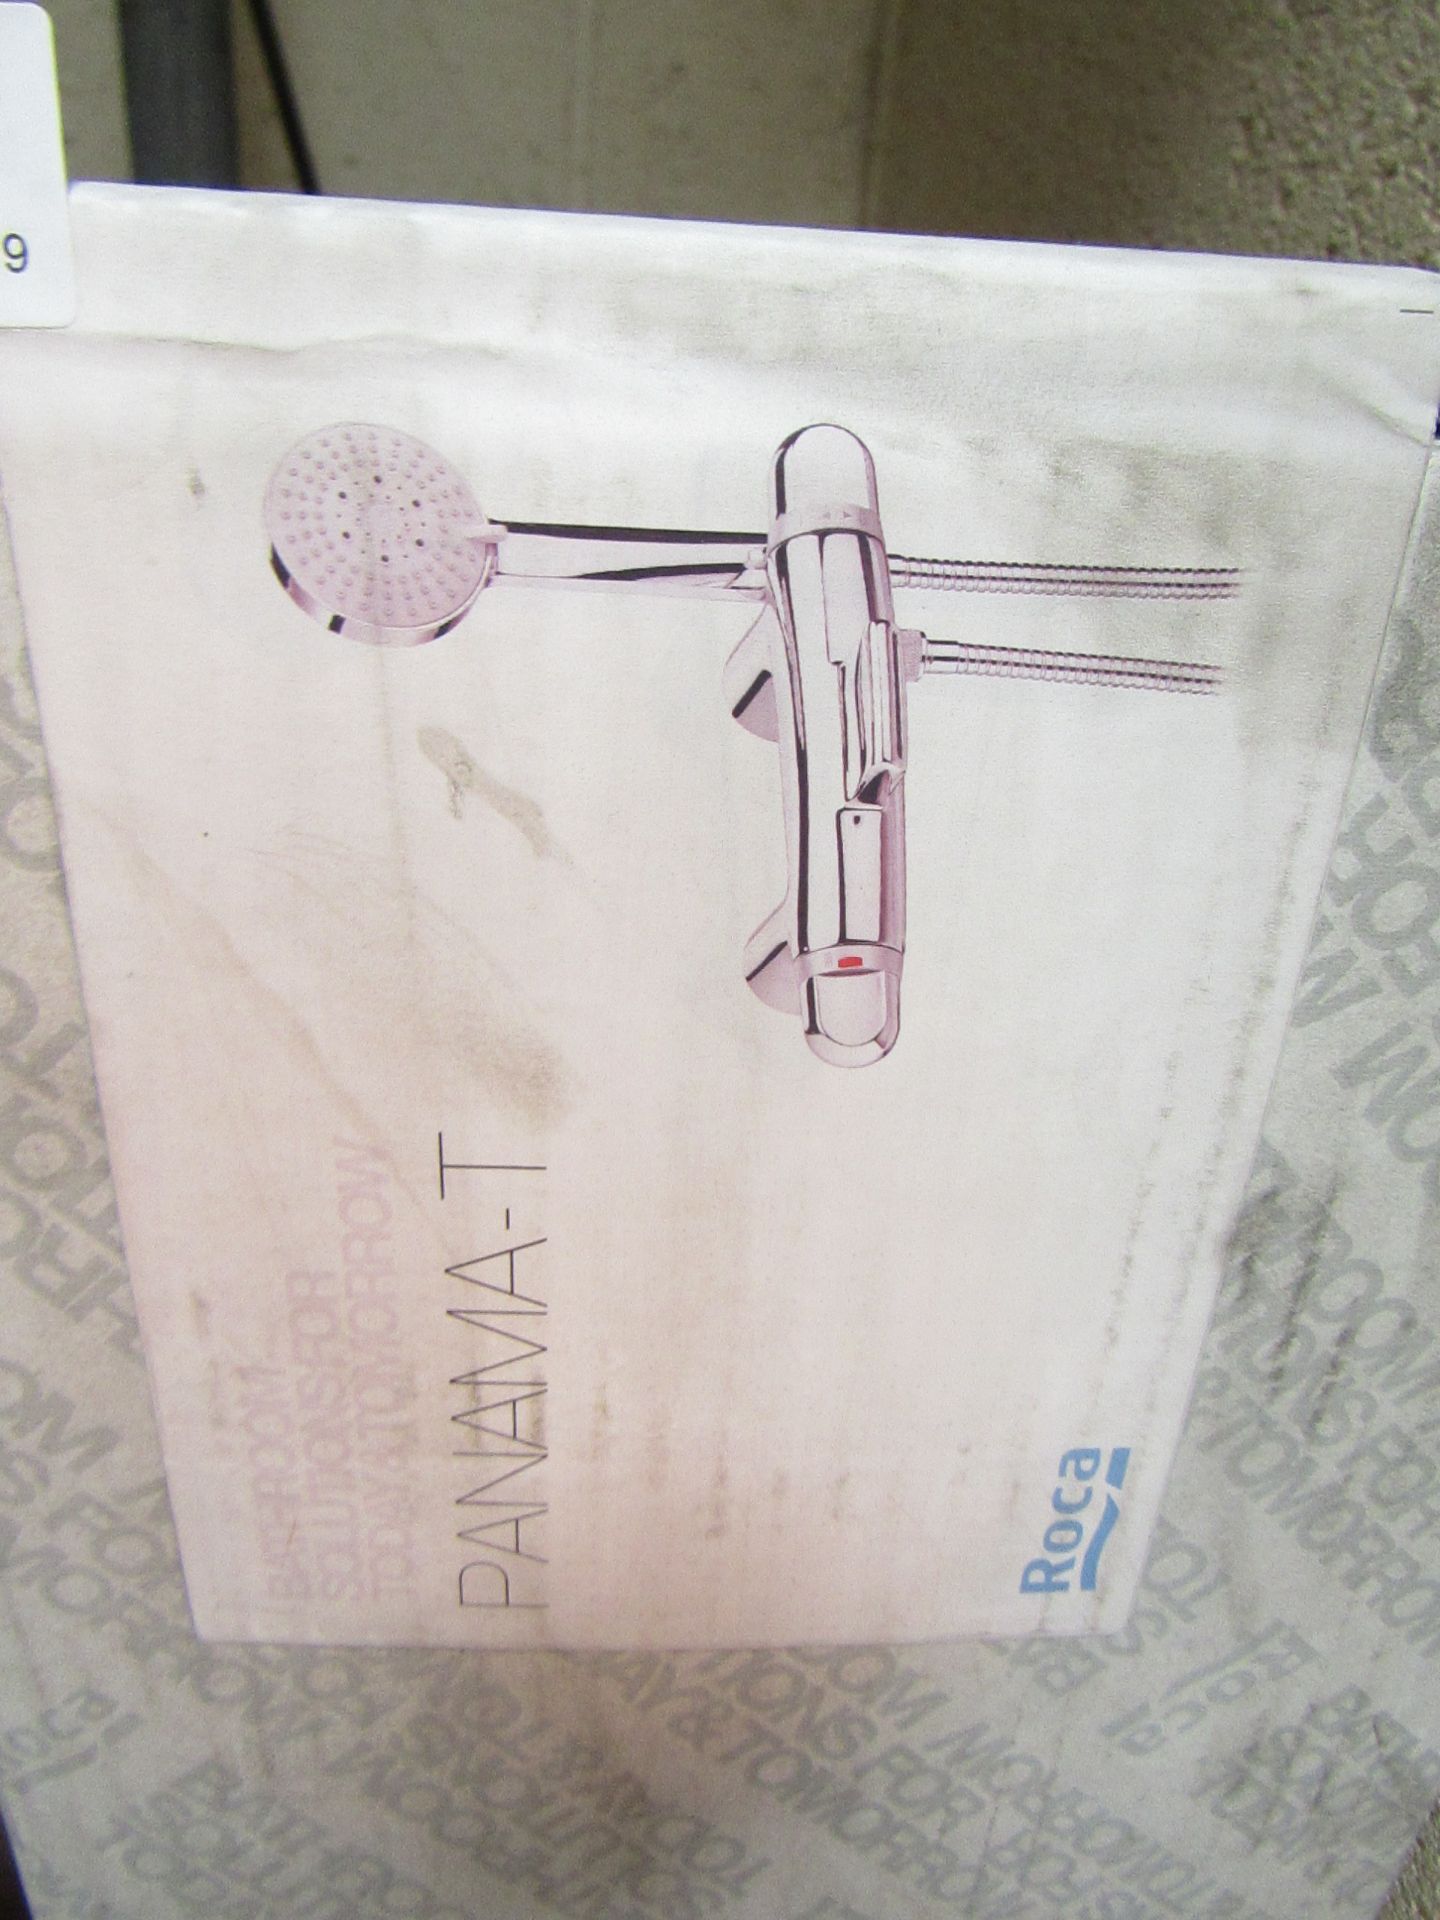 Roca panama T bath shower tap, unused and boxed, RRP ?390